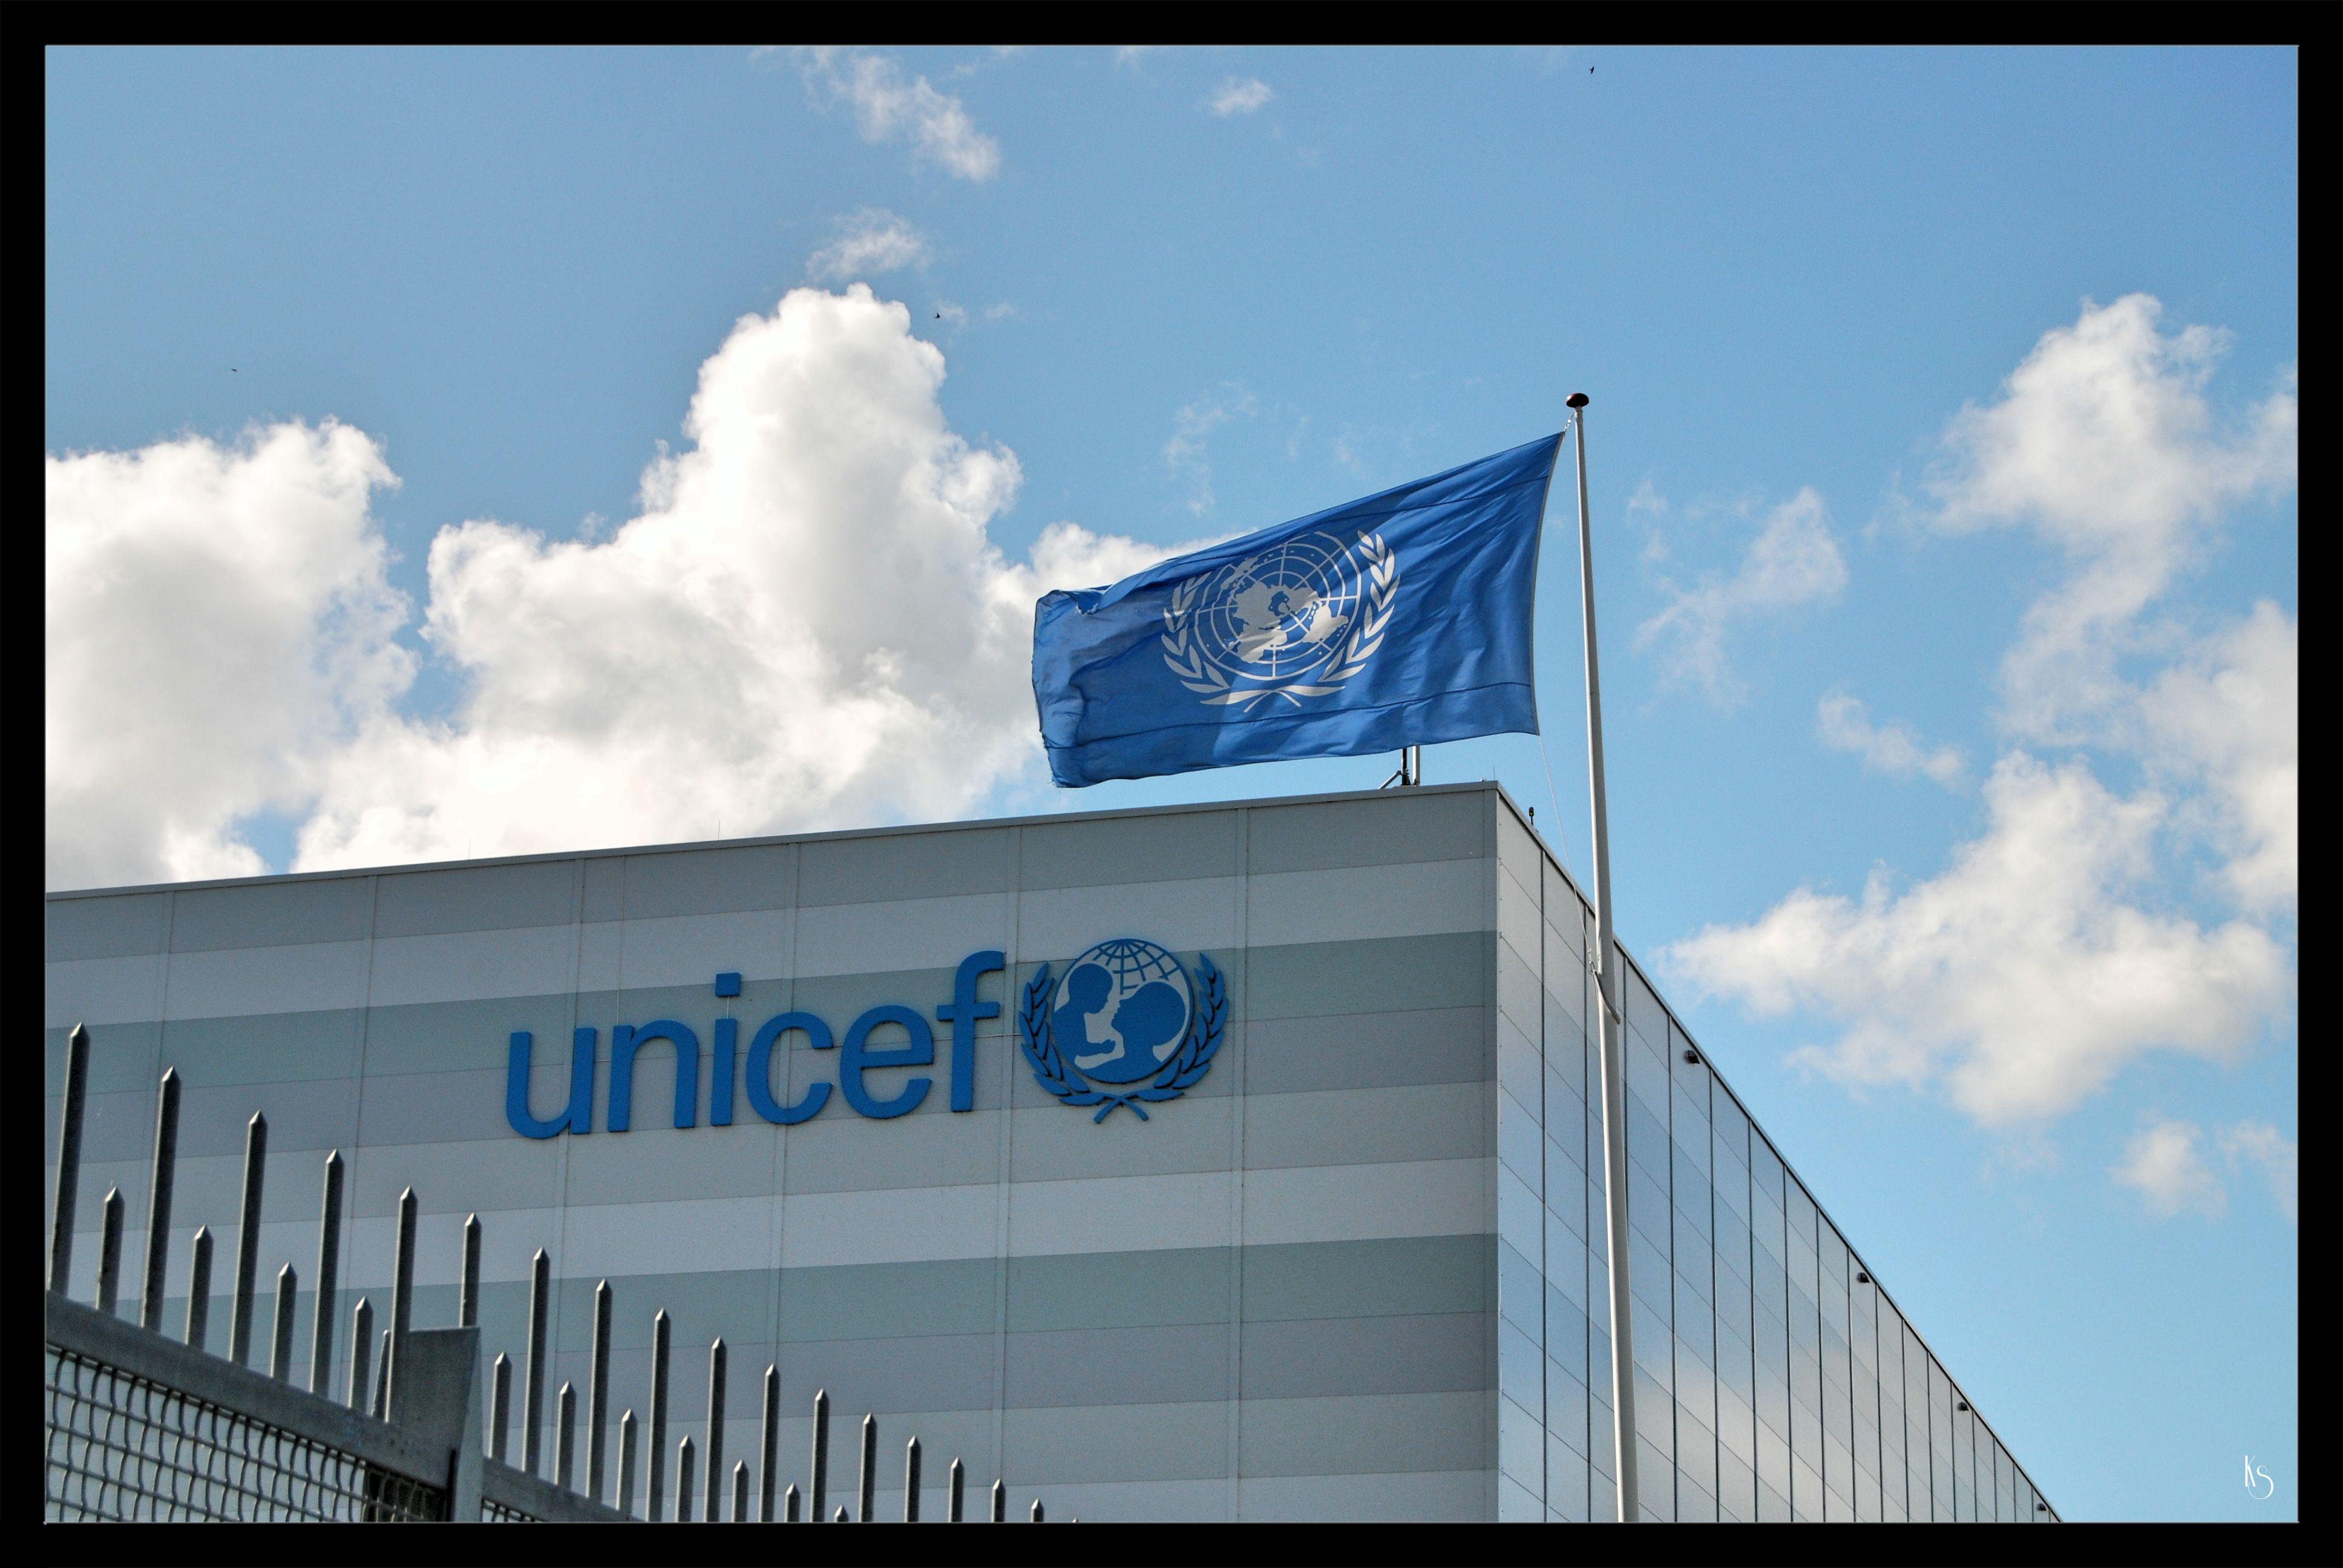 UN Building Logo - Truth about the symbols of Unicef and the United Nations